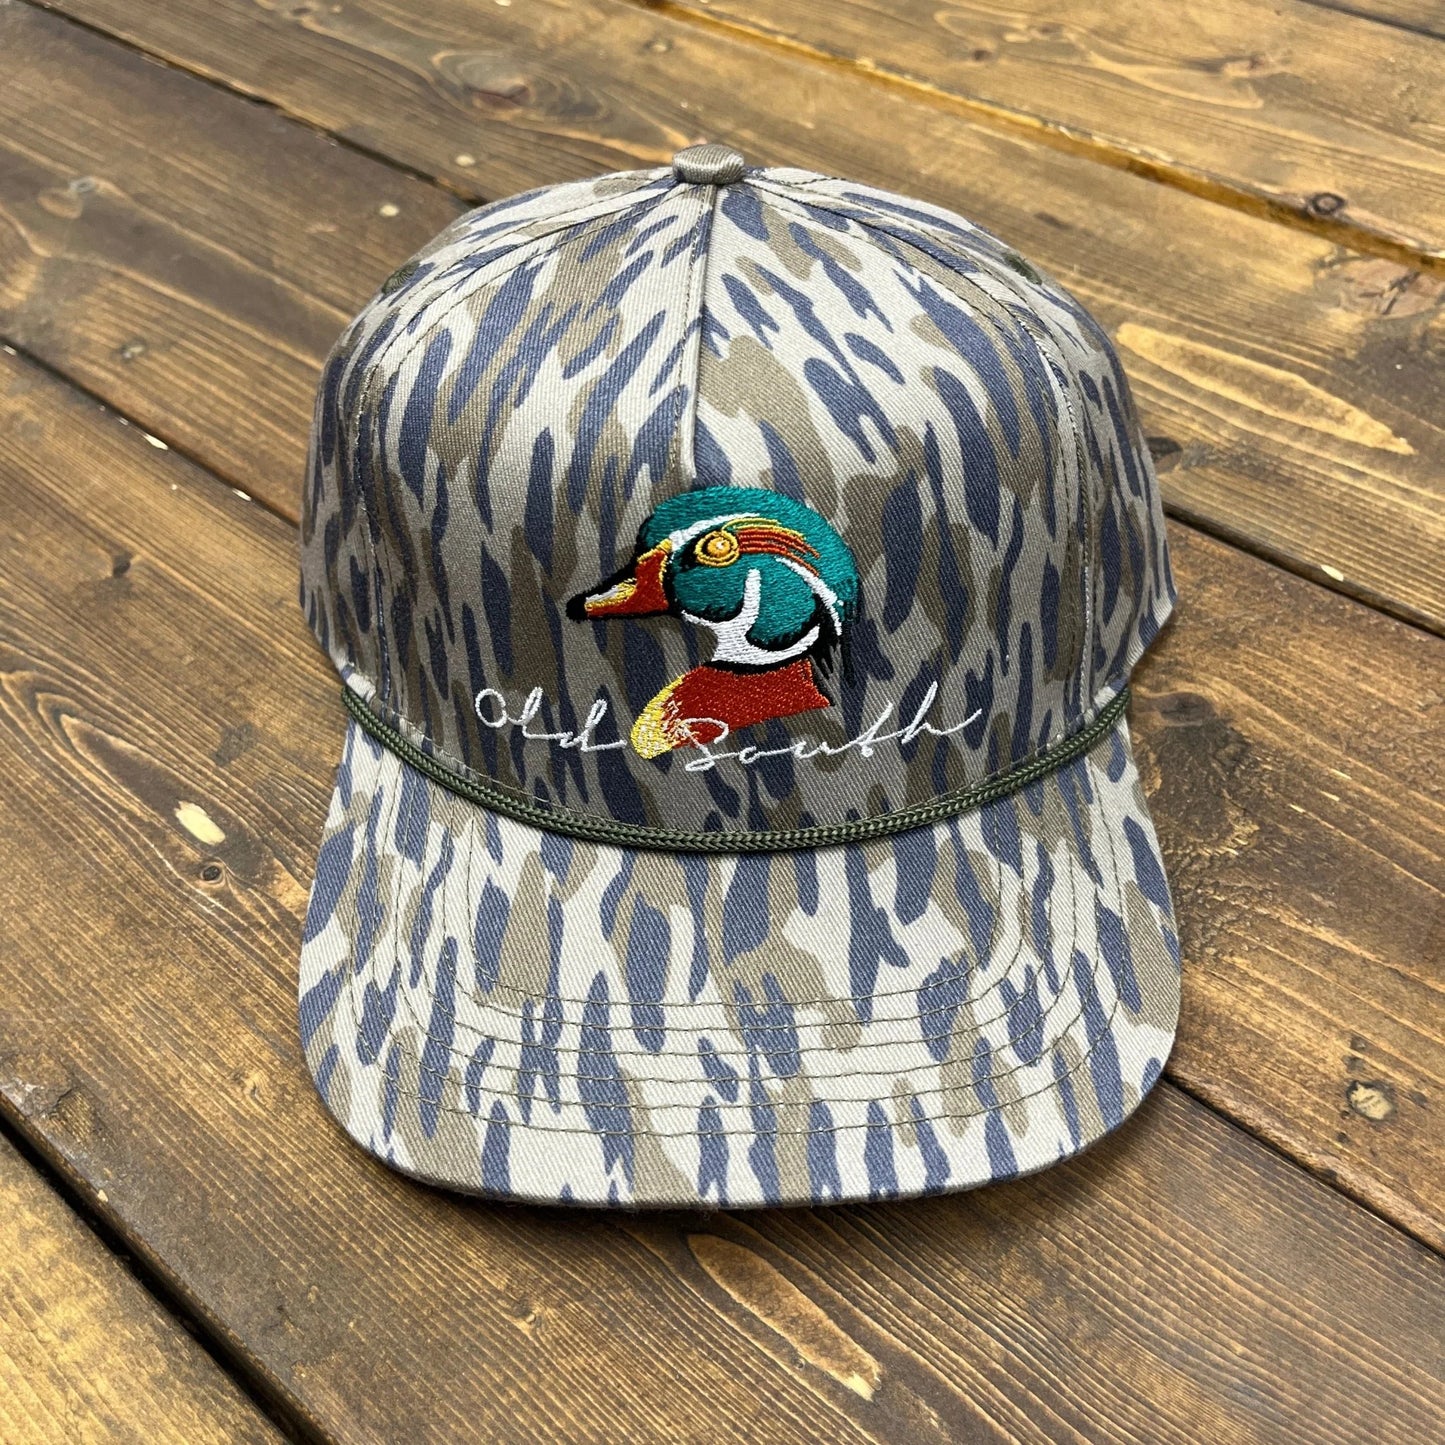 Old South Wood Duck Head Osland Camo - YOUTH Trucker Hat